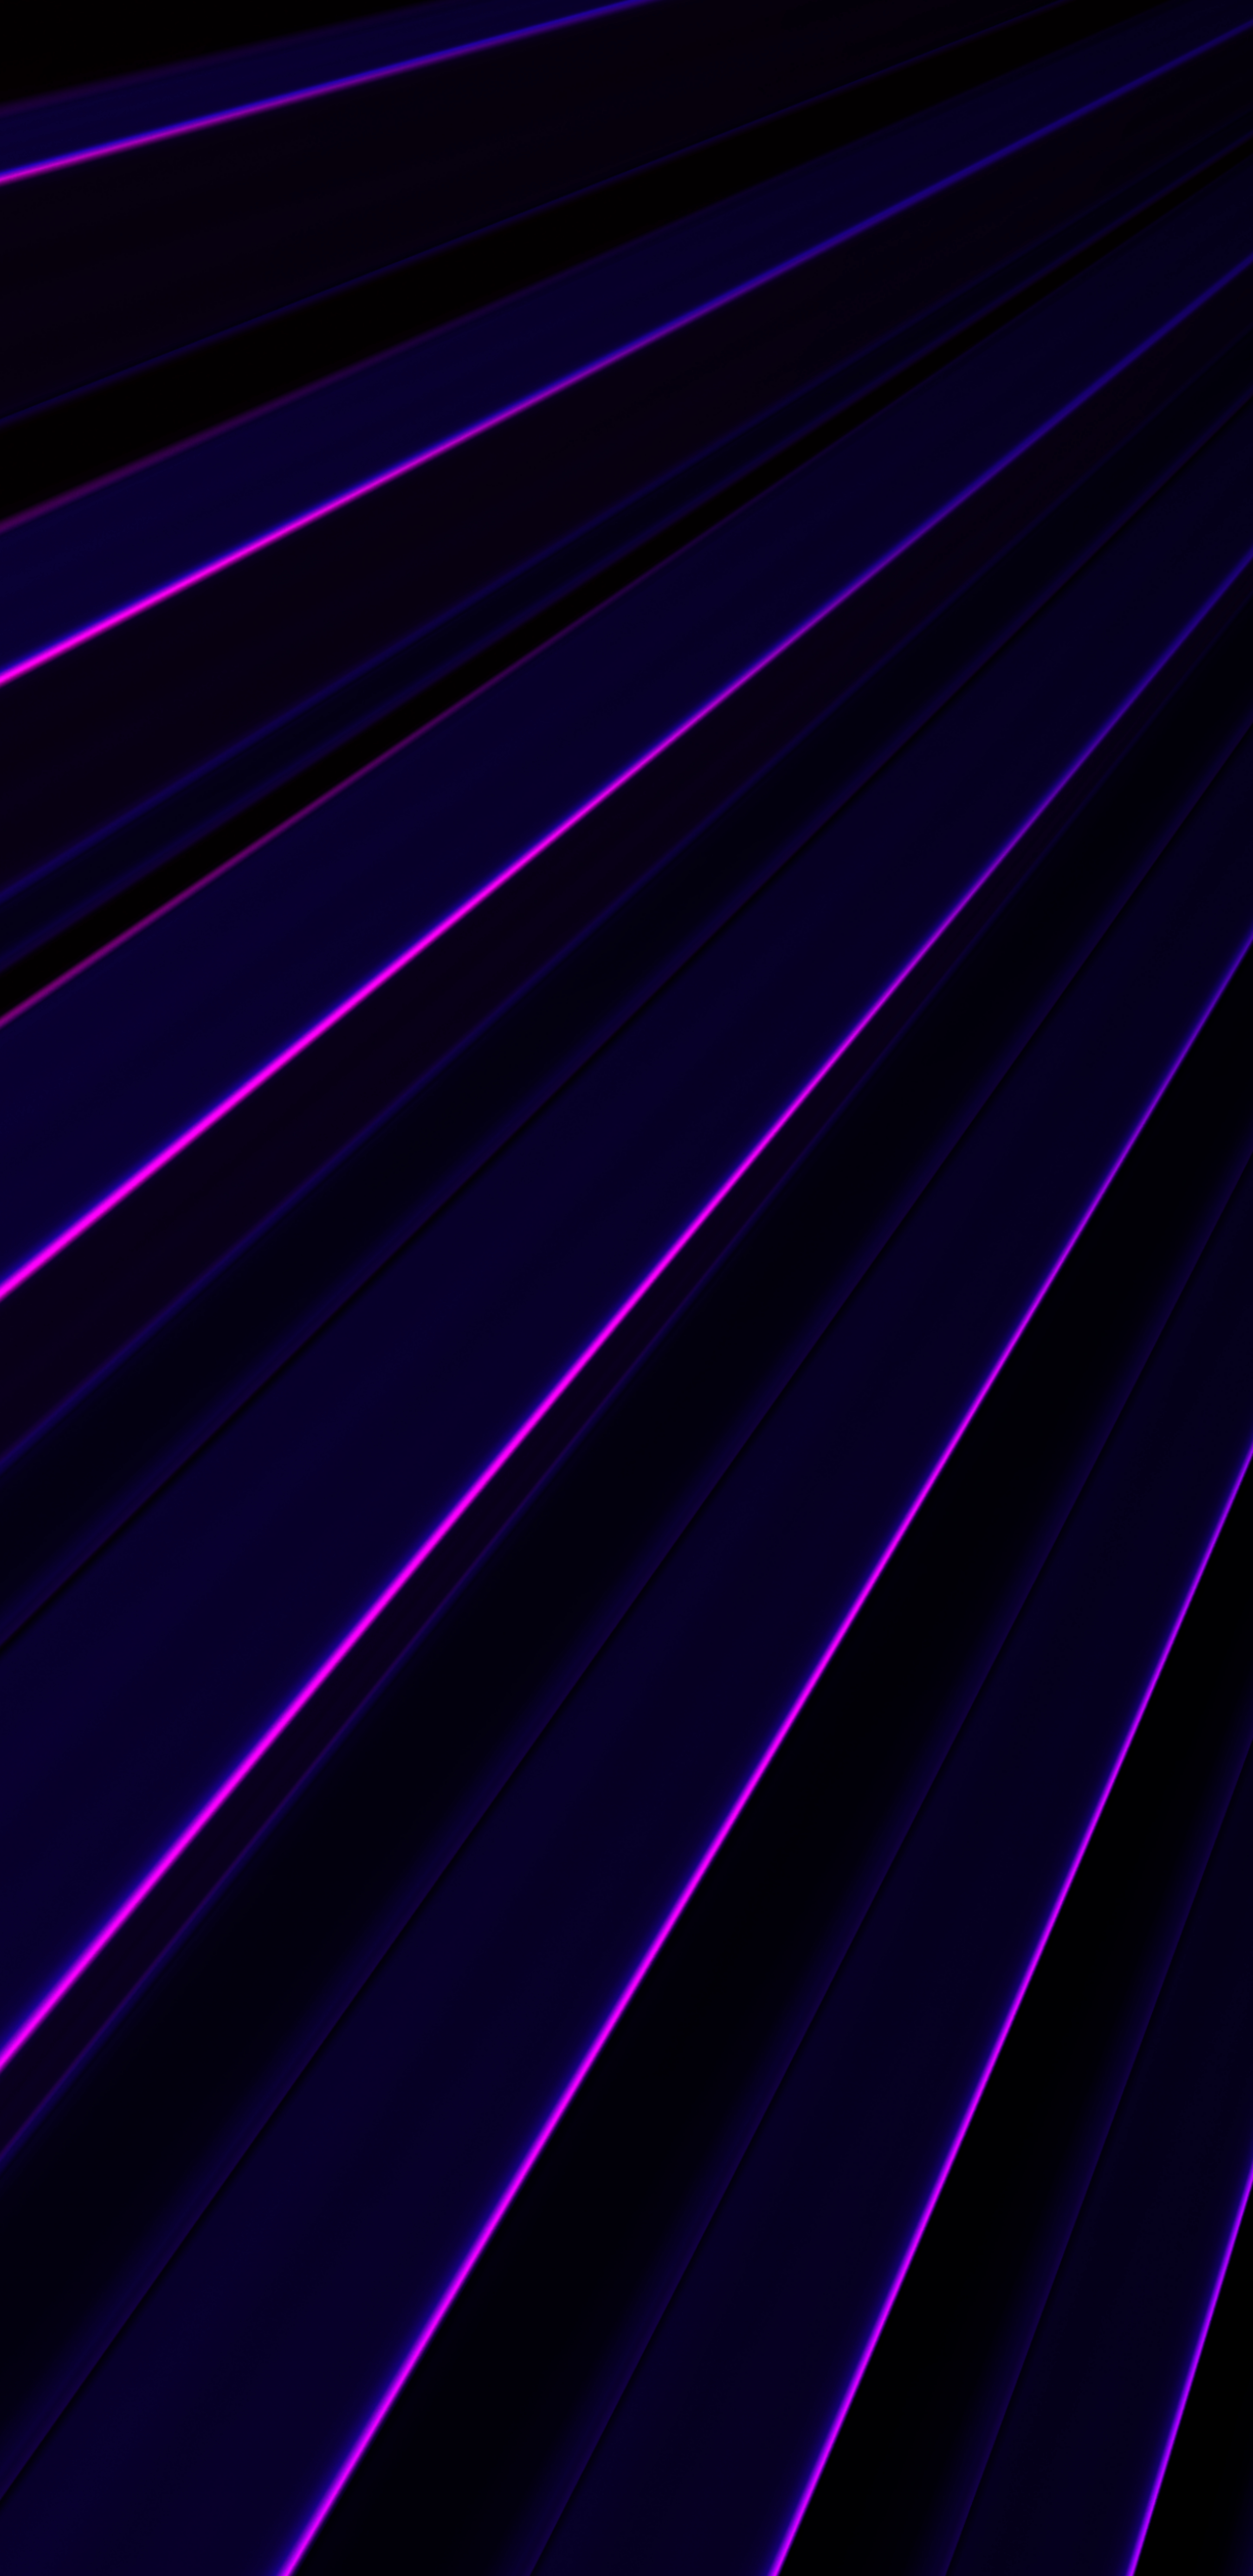 purple, neon, glow, stripes, obliquely, streaks, abstract, violet, lines phone background